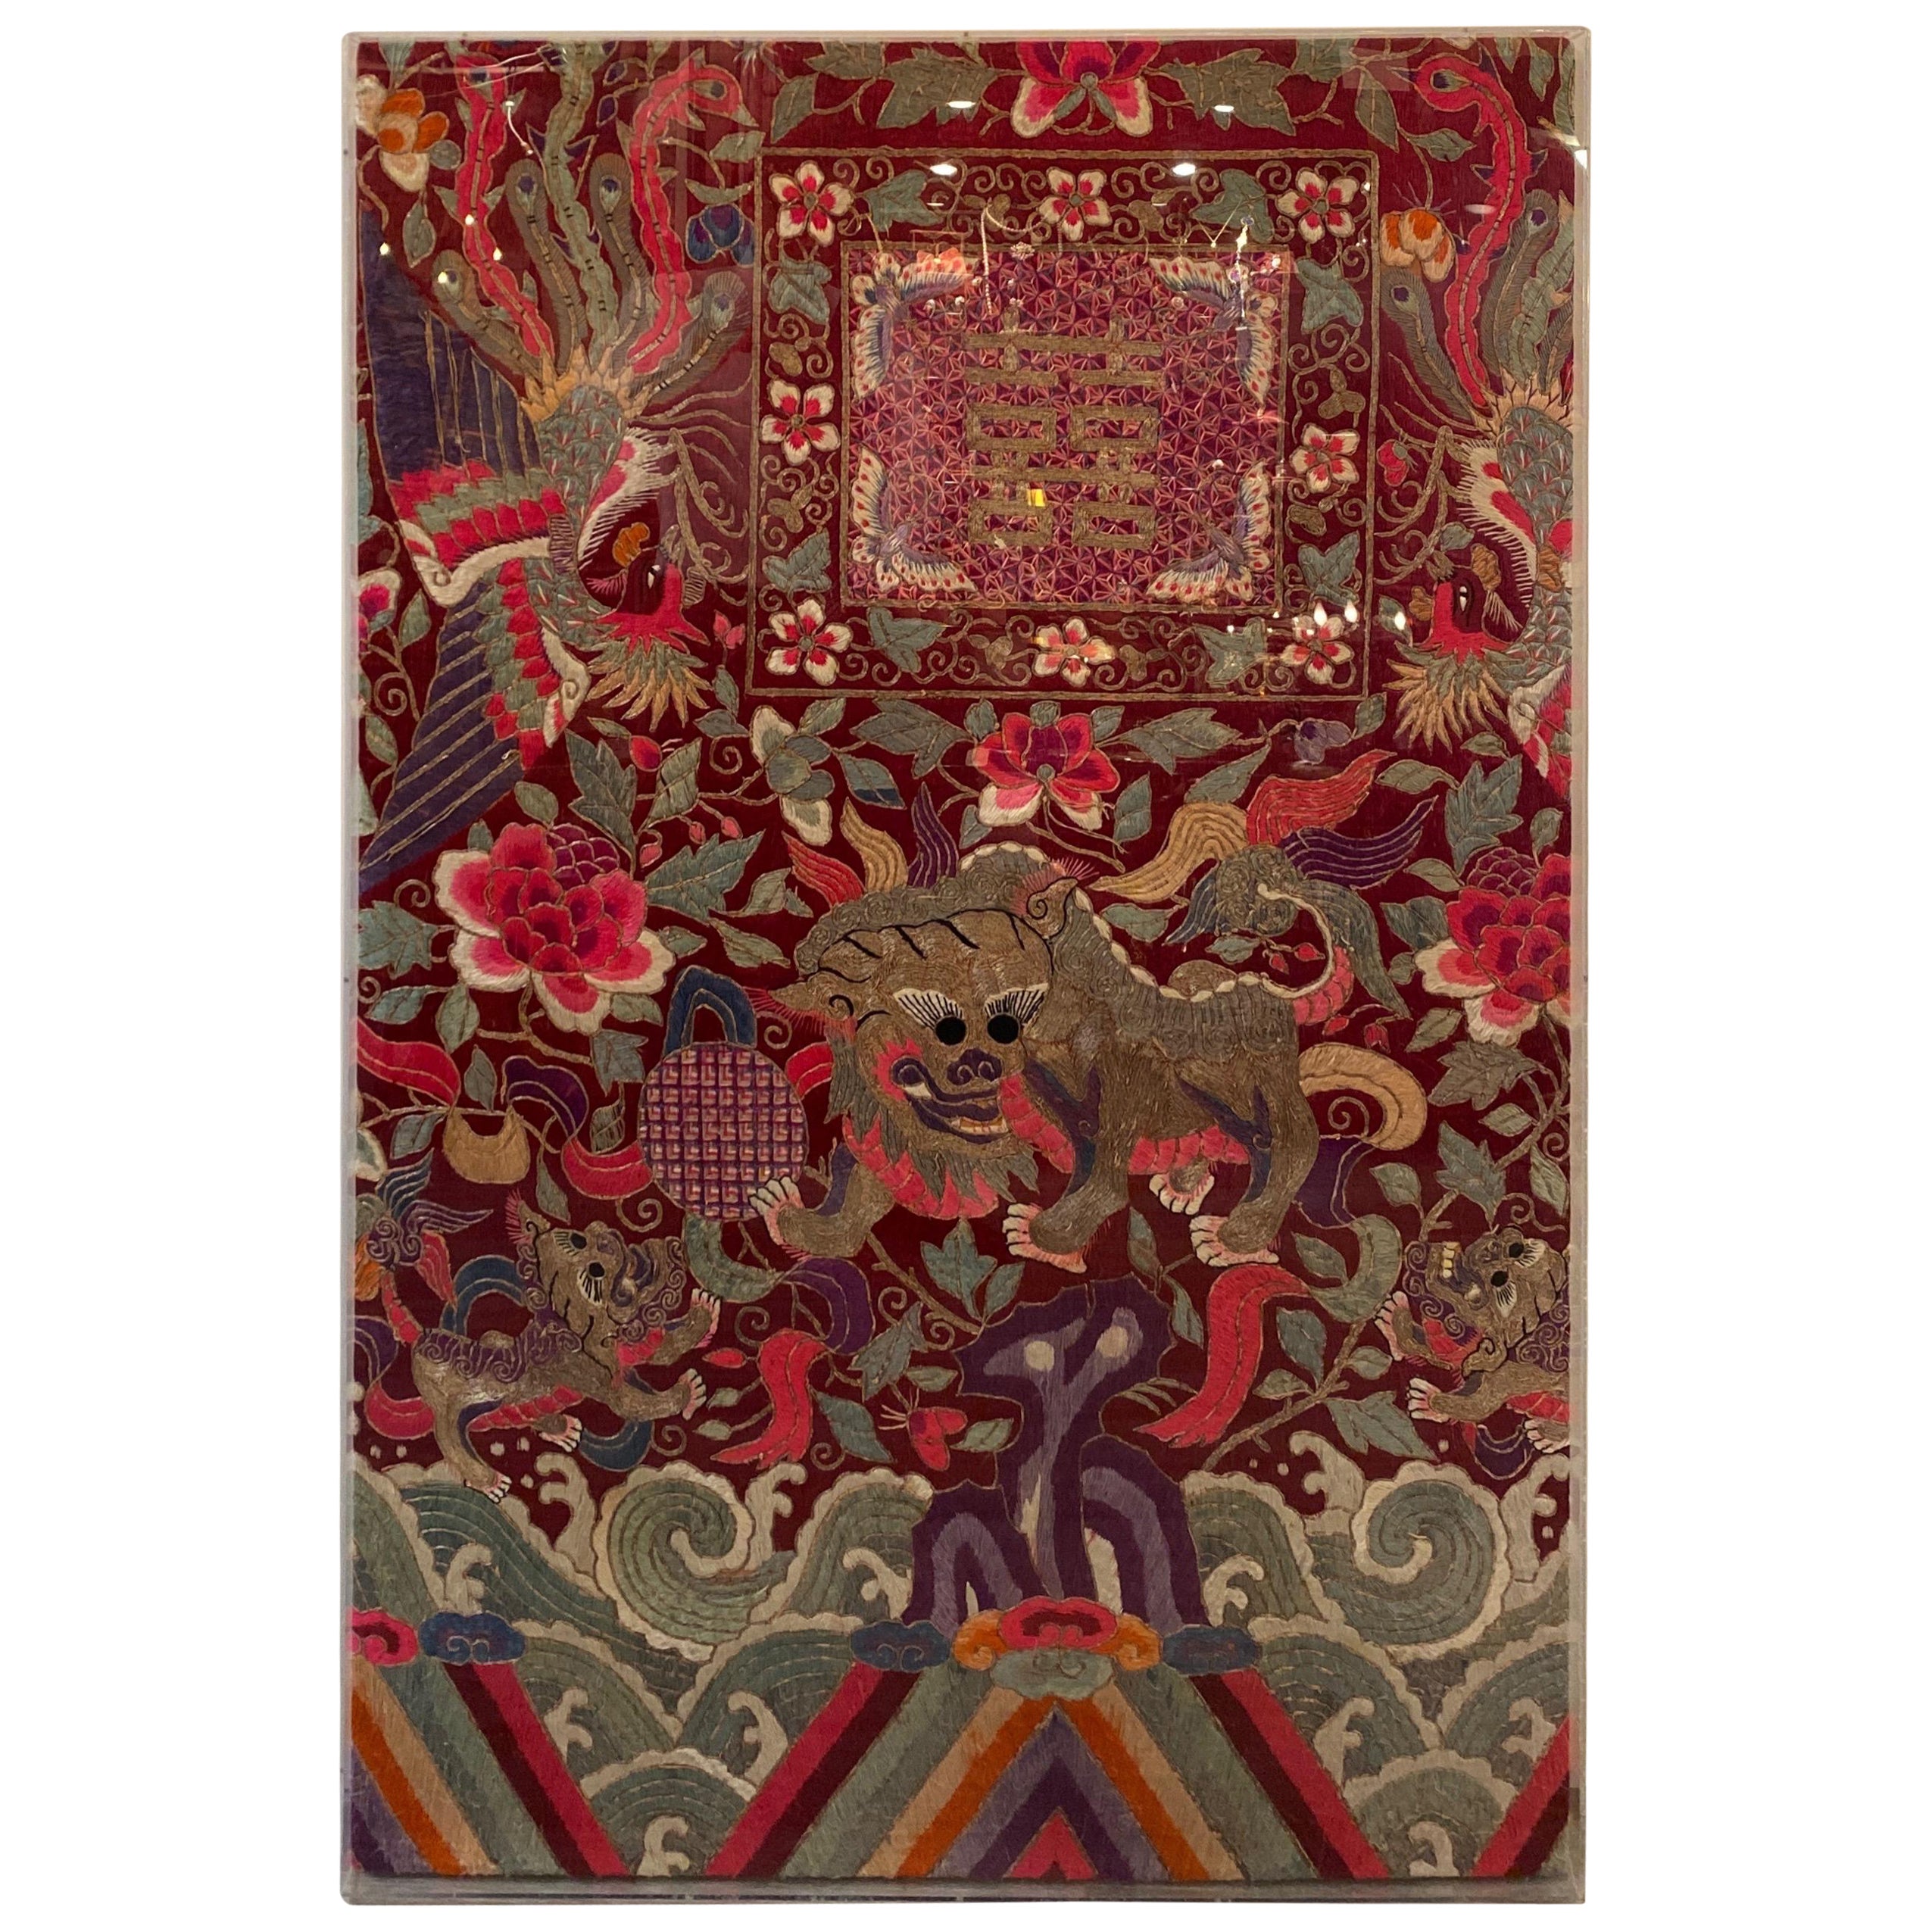 Late 19th Century Framed Needlework Chinese Tapestry